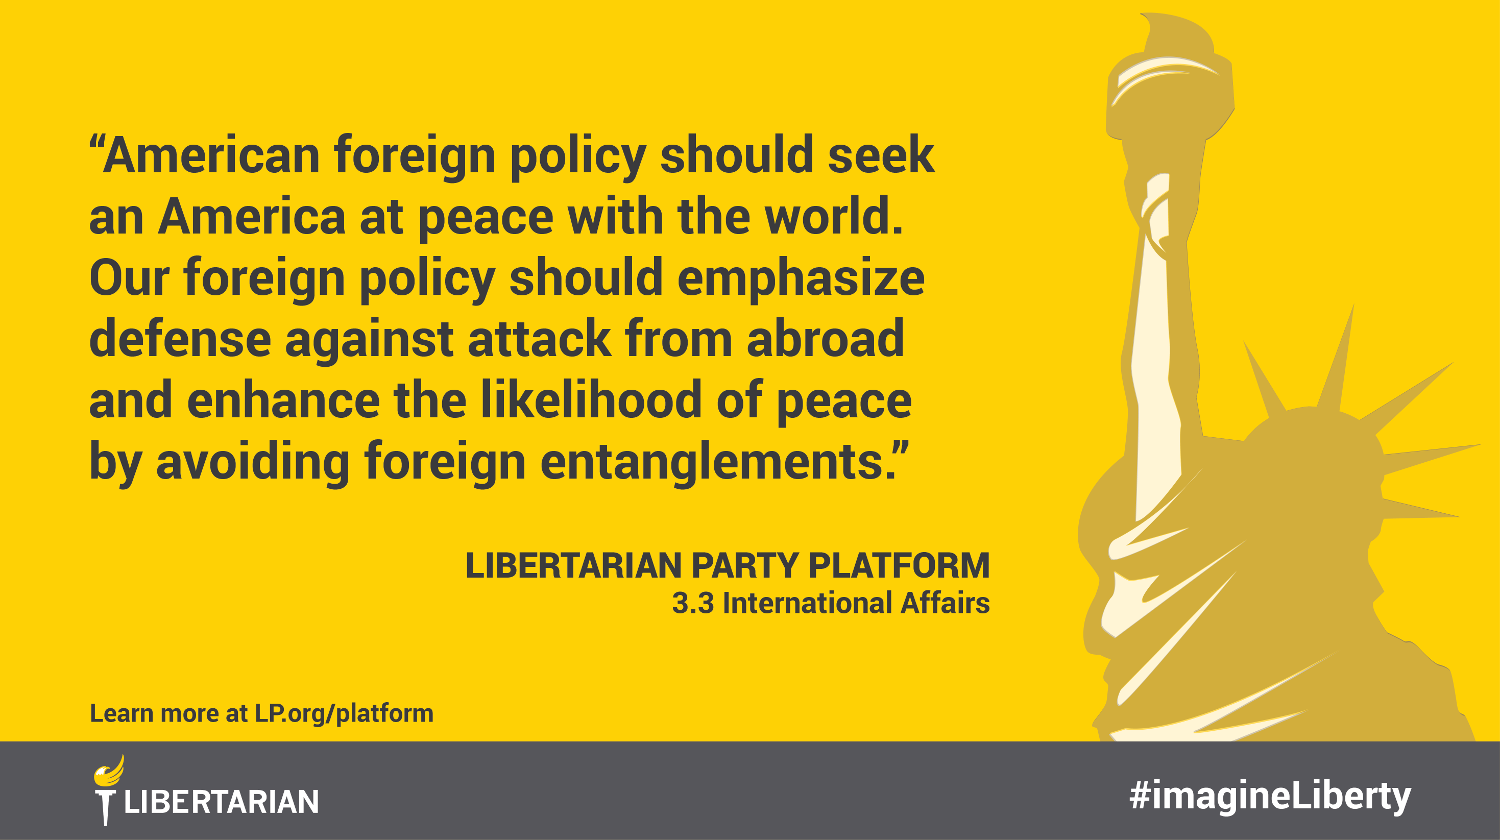 American foreign policy should seek an America at peace with the world. Our foreign policy should emphasize defense against attack from abroad and enhance the likelihood of peace by avoiding foreign entanglements.